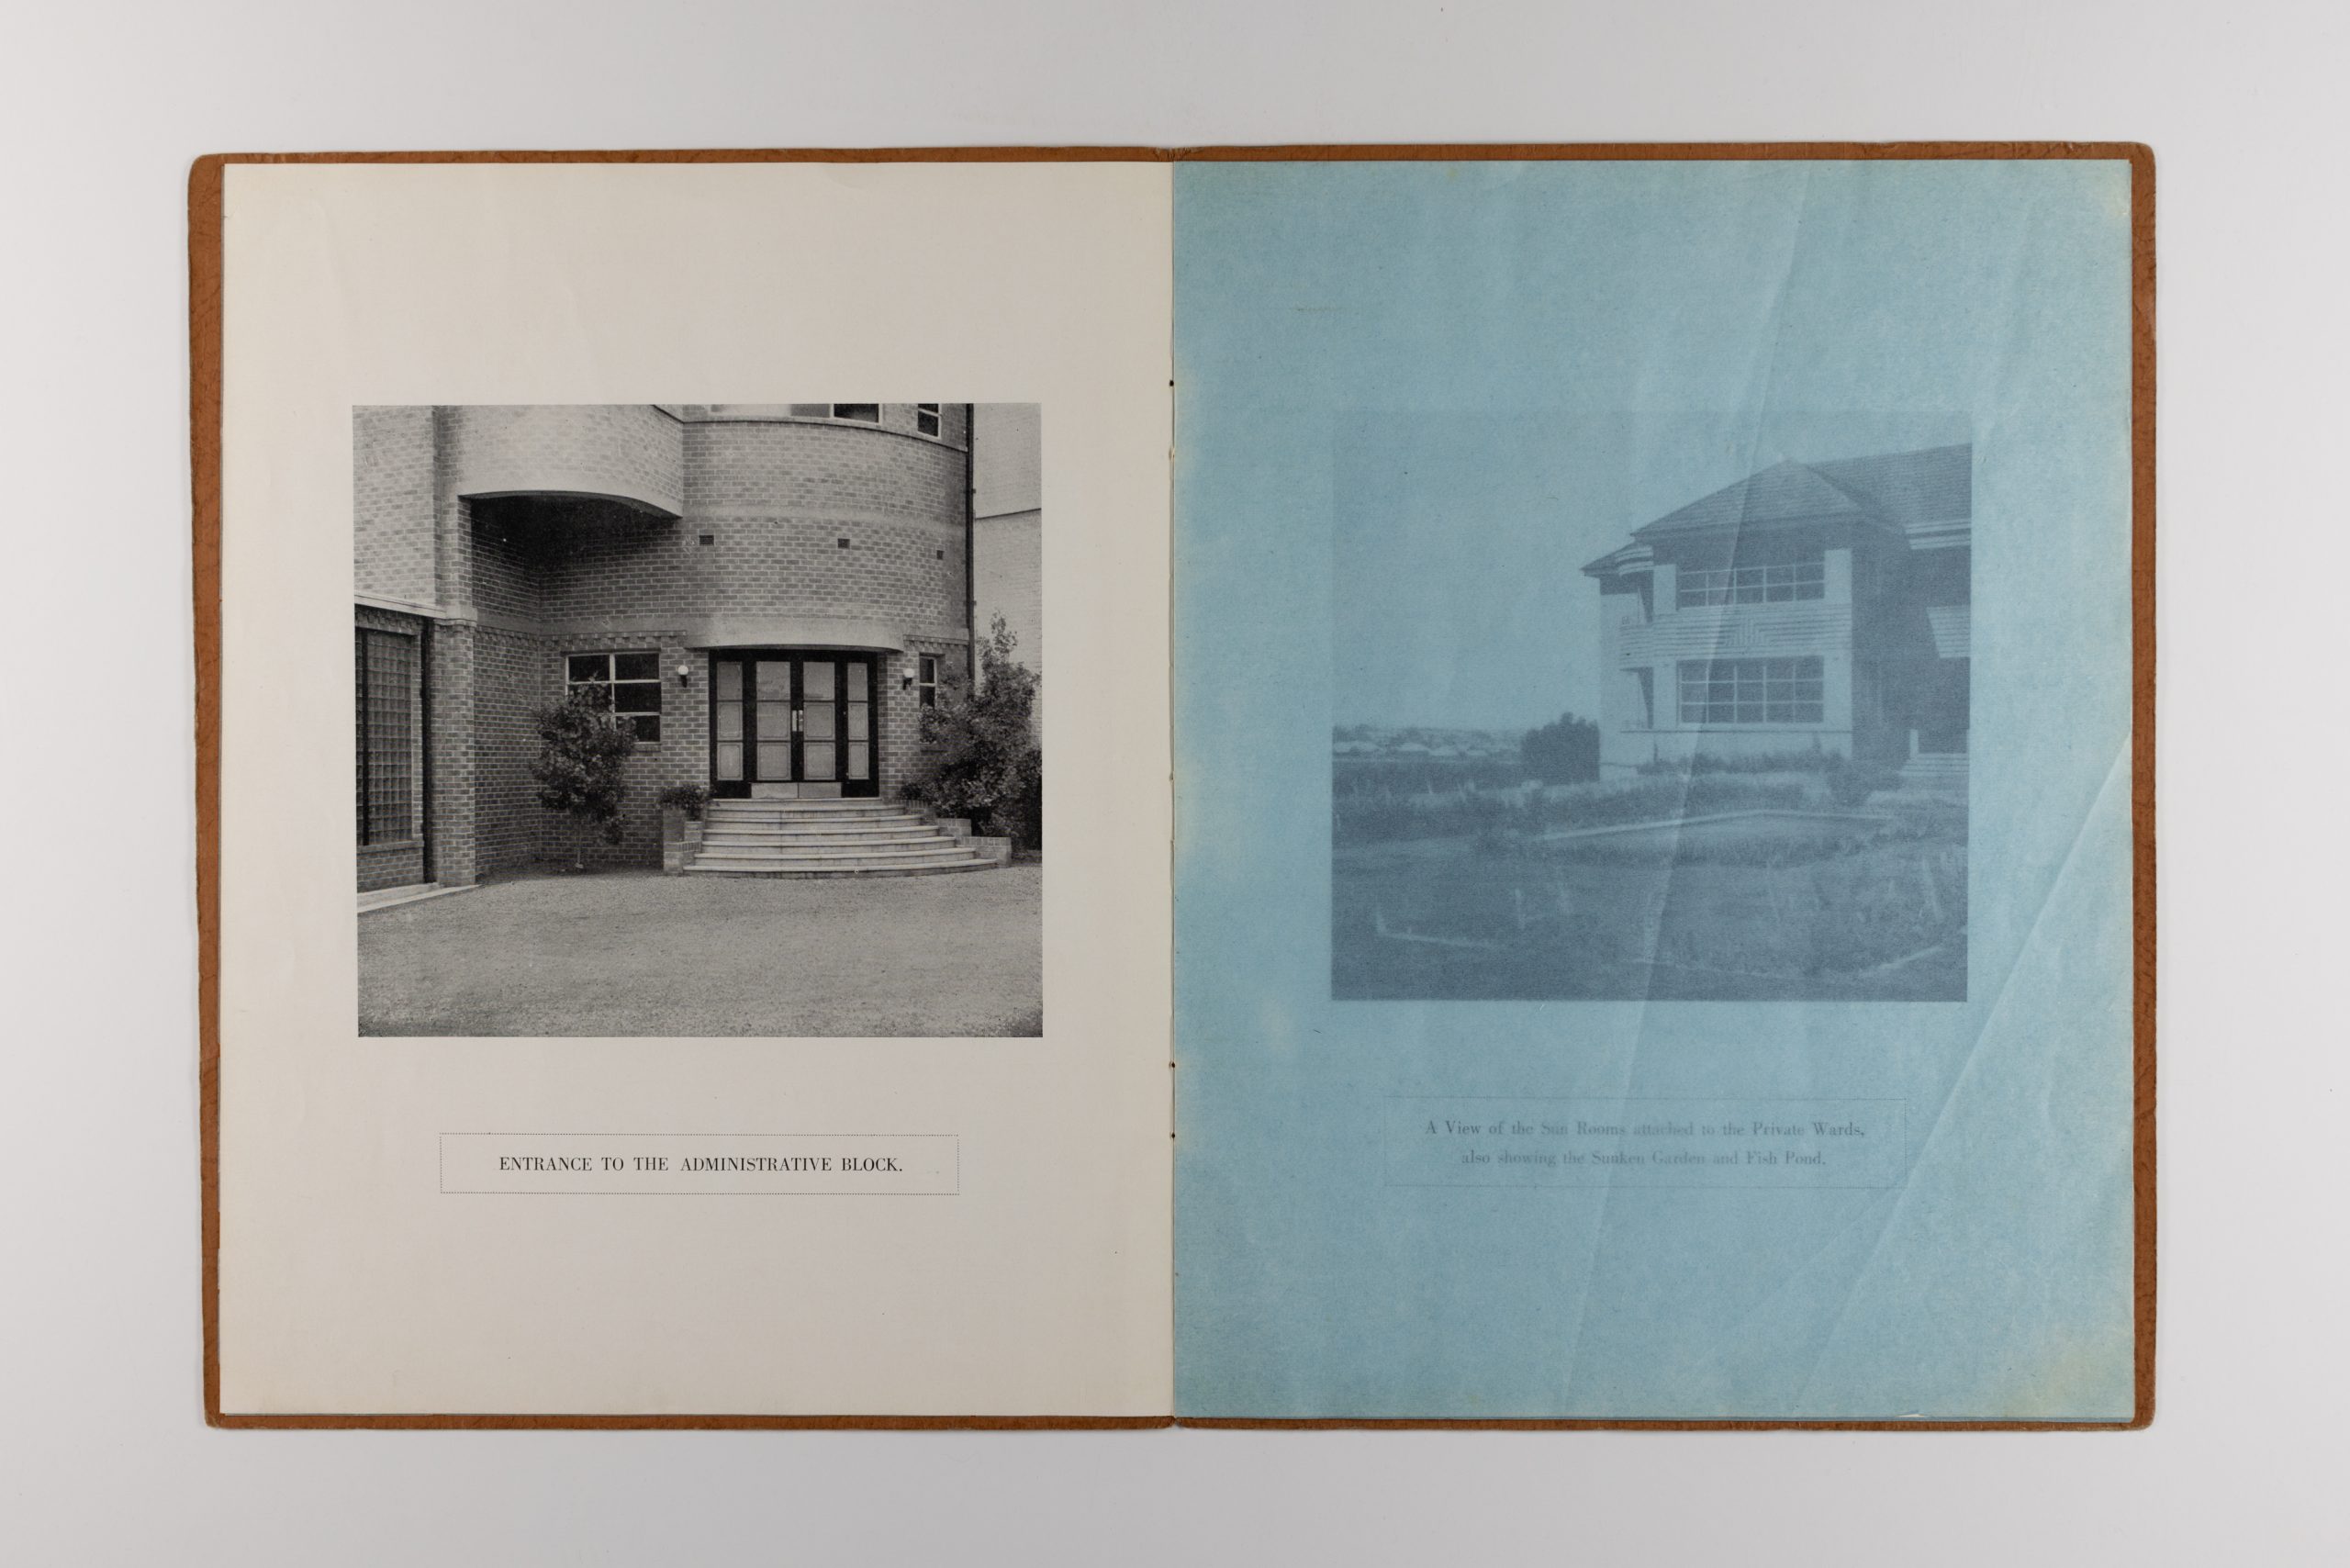 open pages of booklet, the left page has an image of the entrance to the administrative block, the right page is a semi-transparent blue page